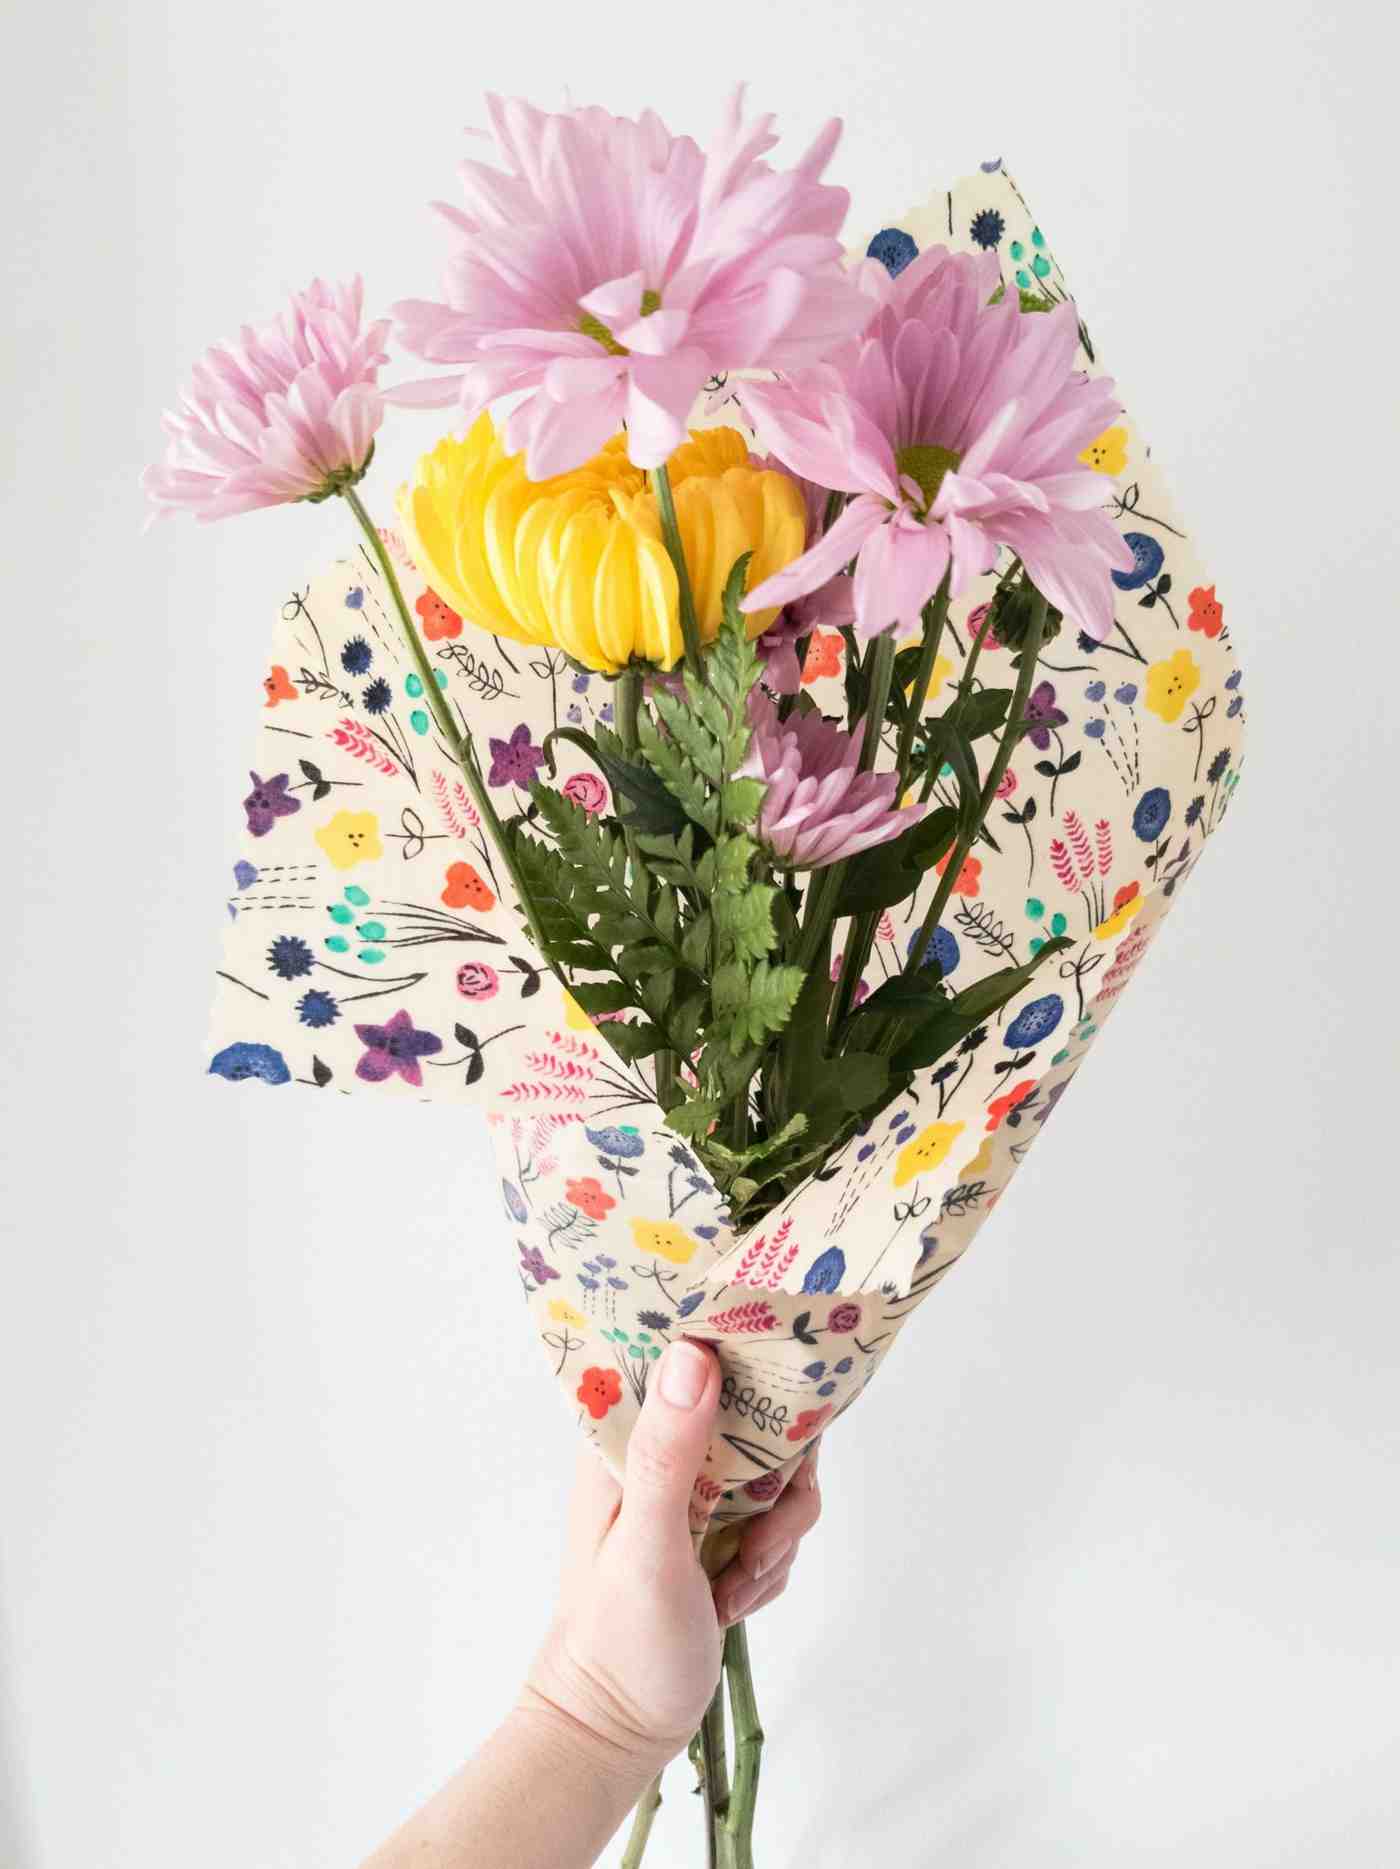 Beautiful gift idea with colorful growths - Develop a flower bouquet